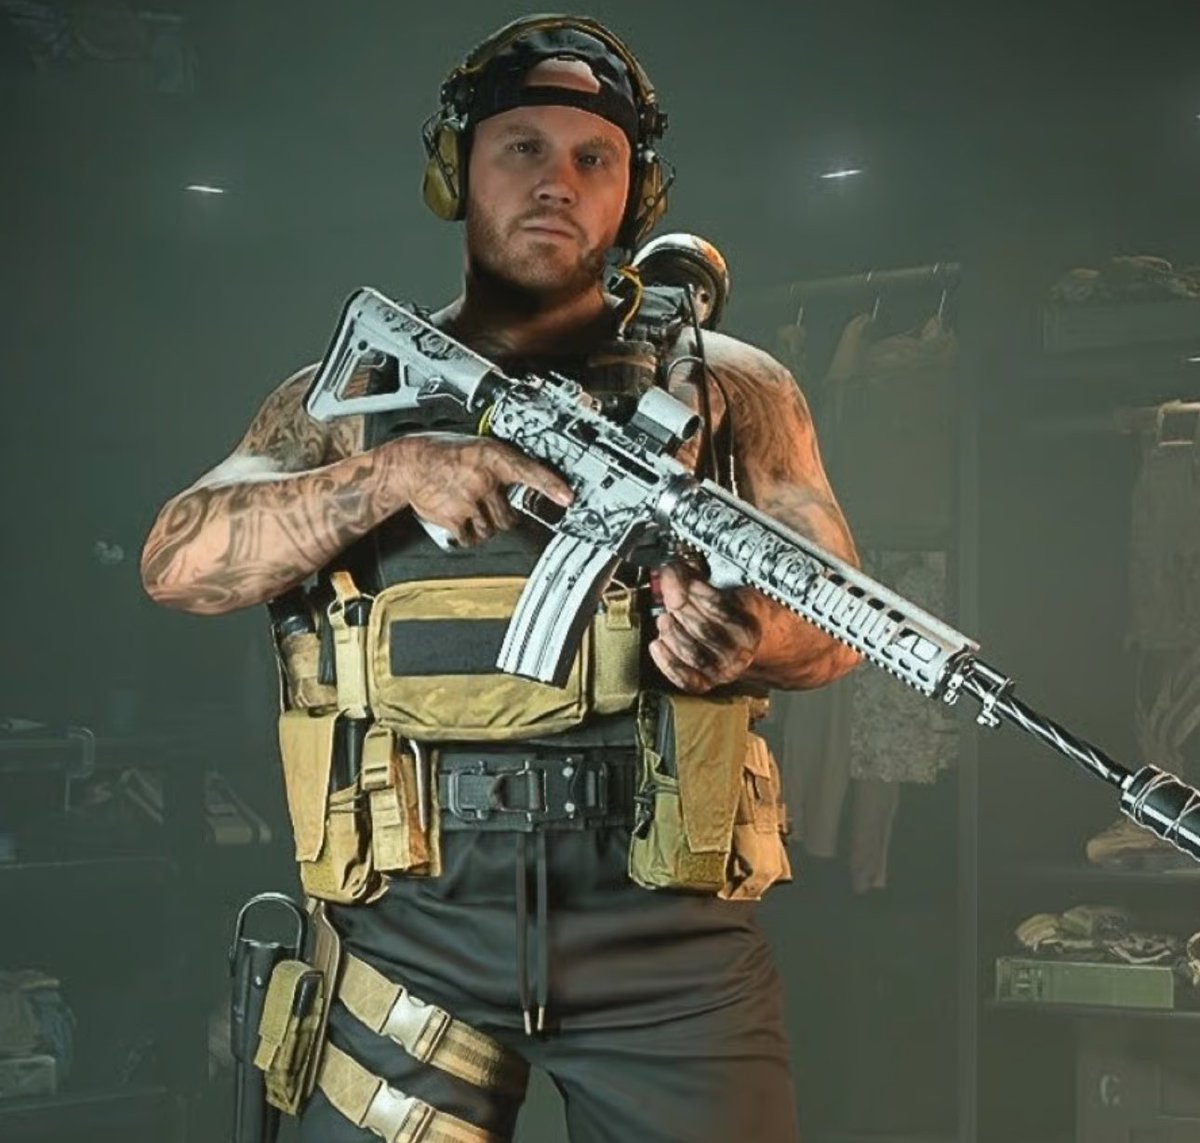 Activision has removed TimTheTatMan’s bundle from the game